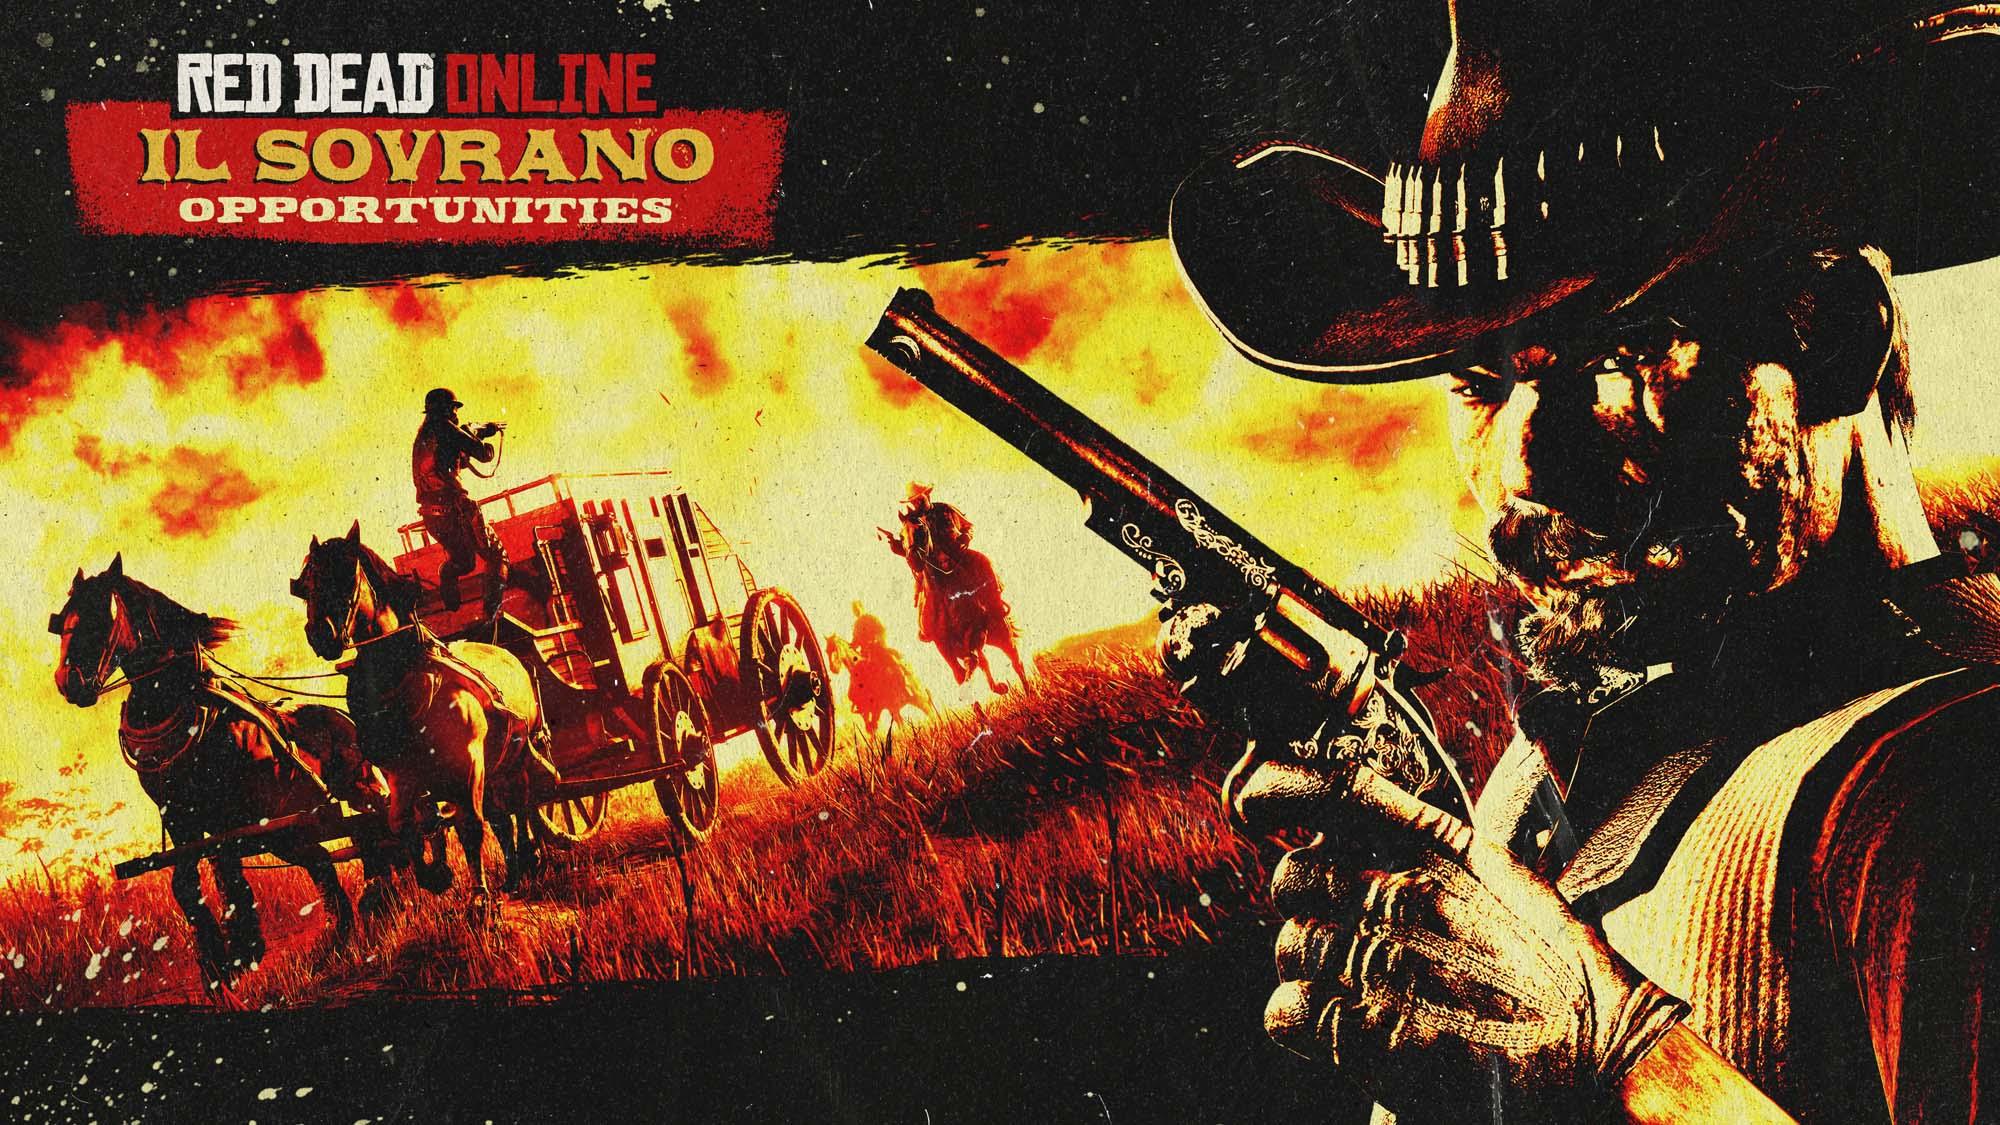 red dead online il sovrano opportunities